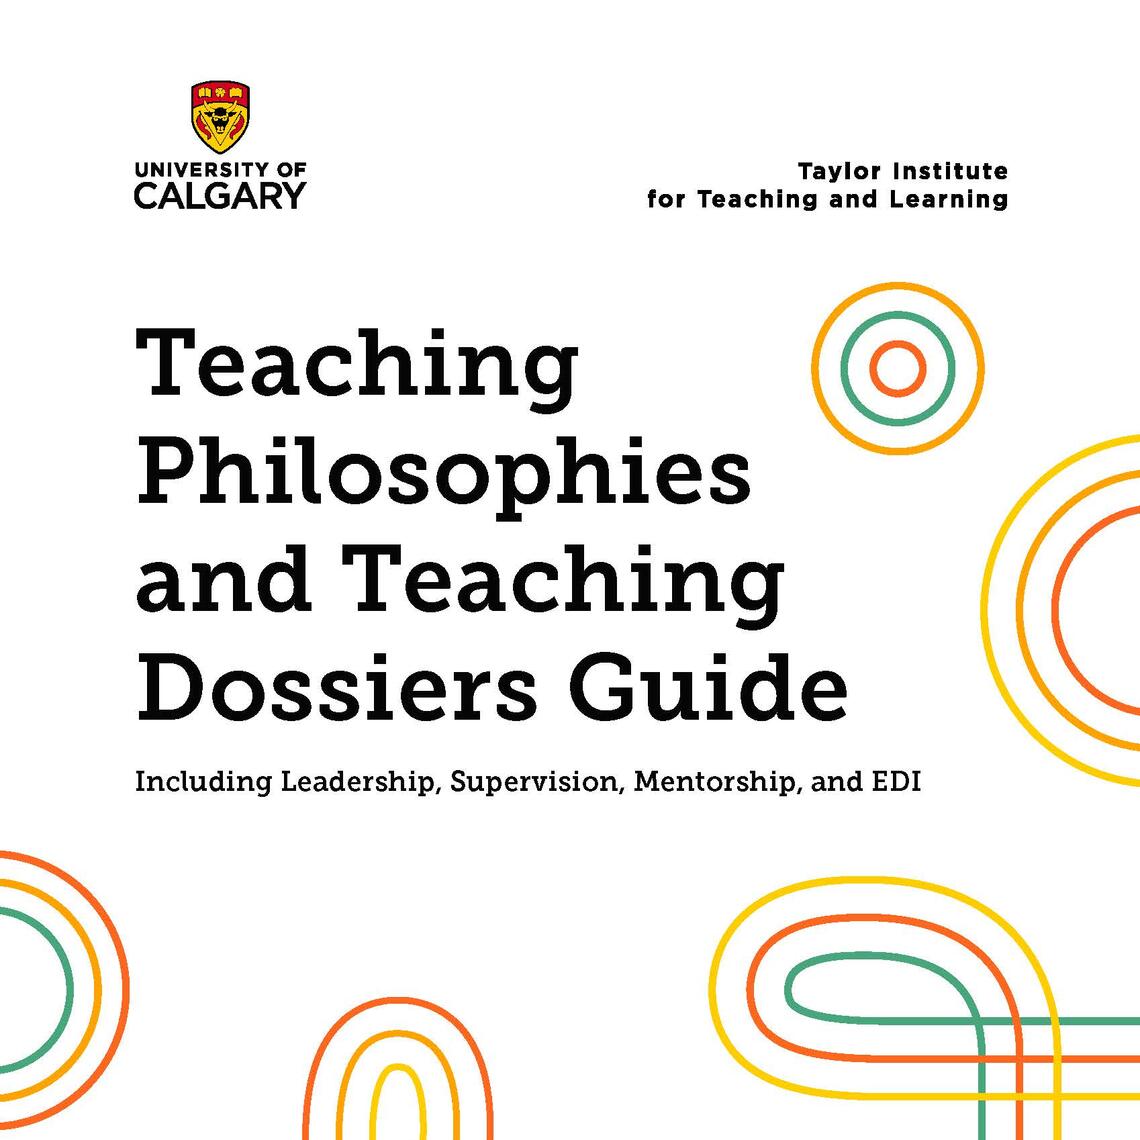 Dossiers guide